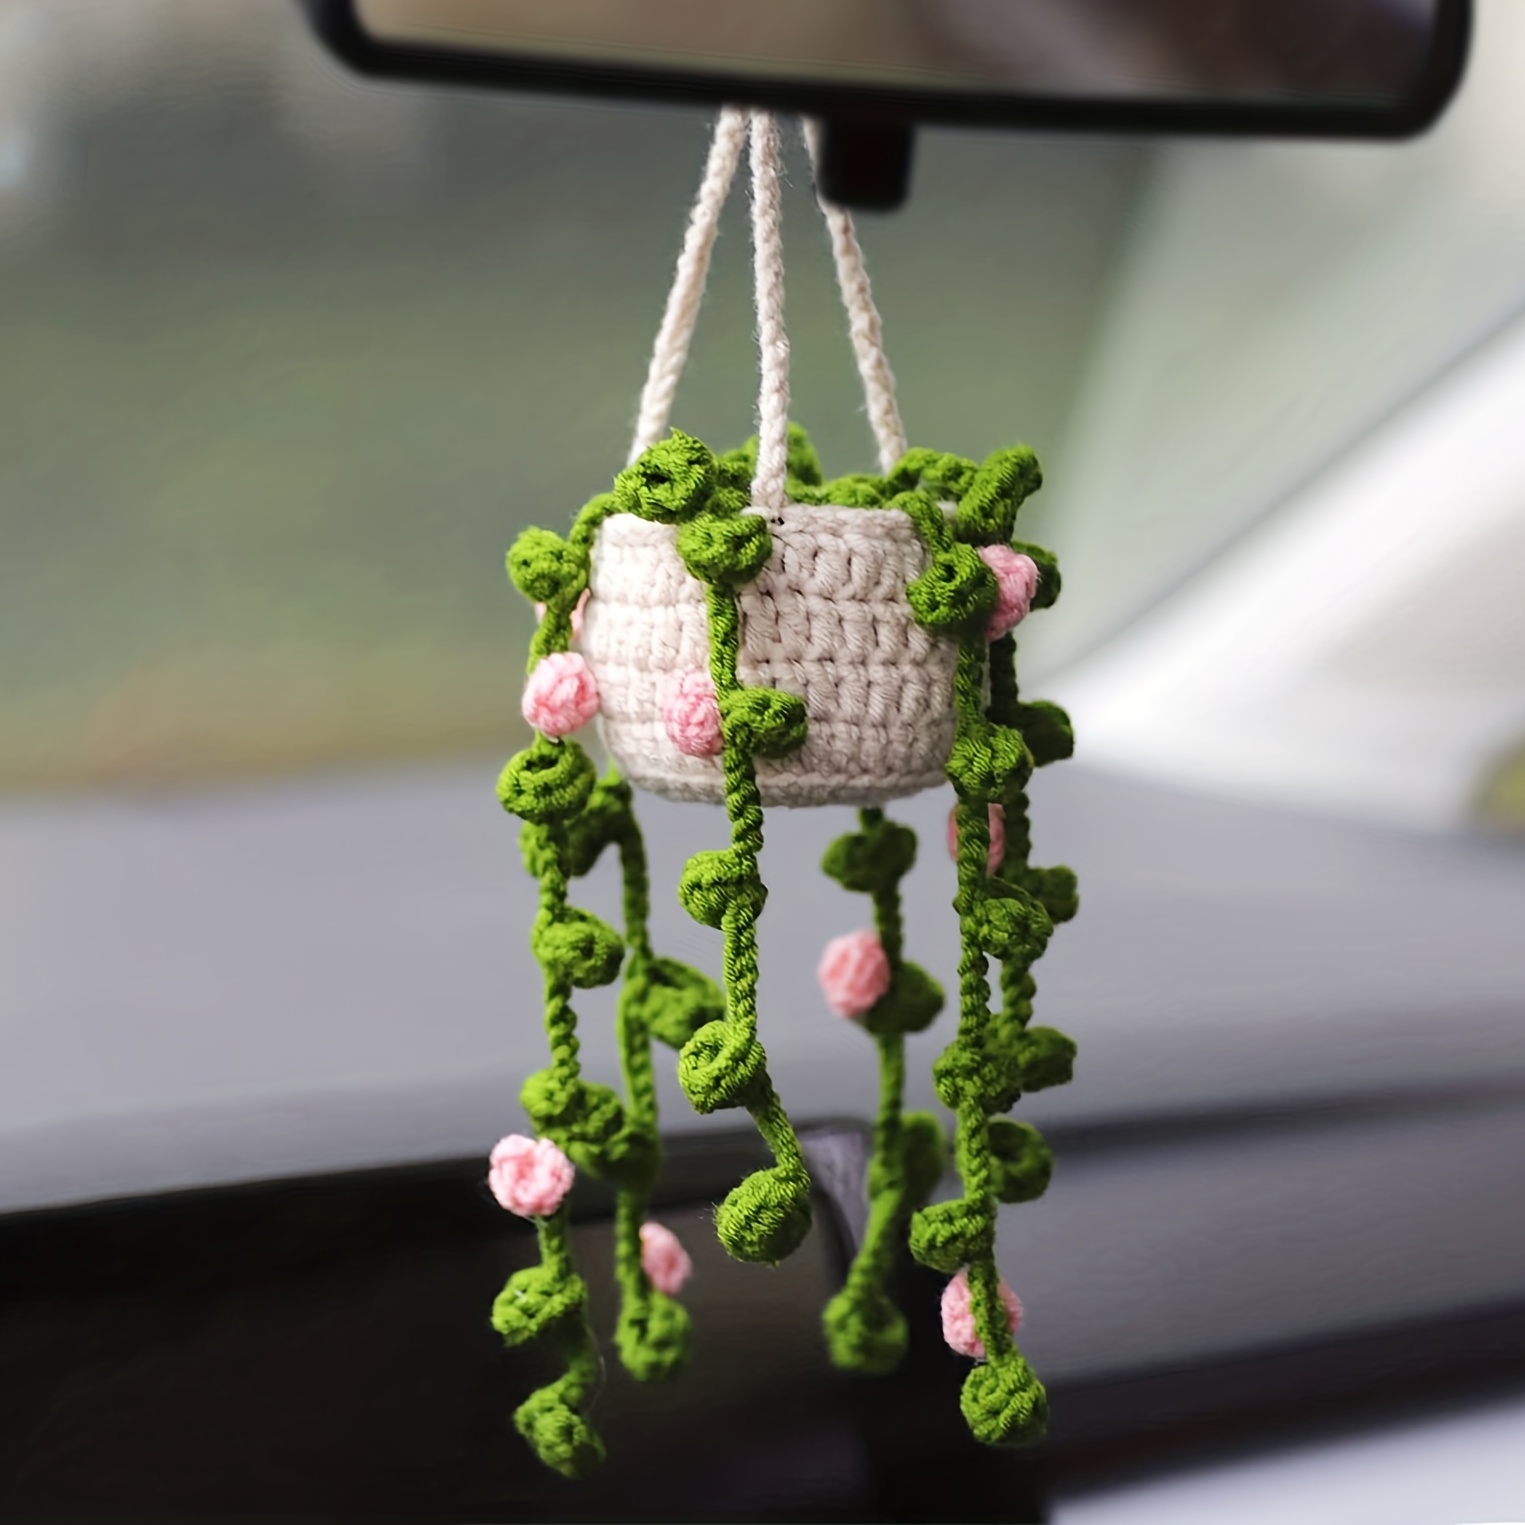 Small Macrame Plant Hanger, Rear View Mirror Charm, Simple